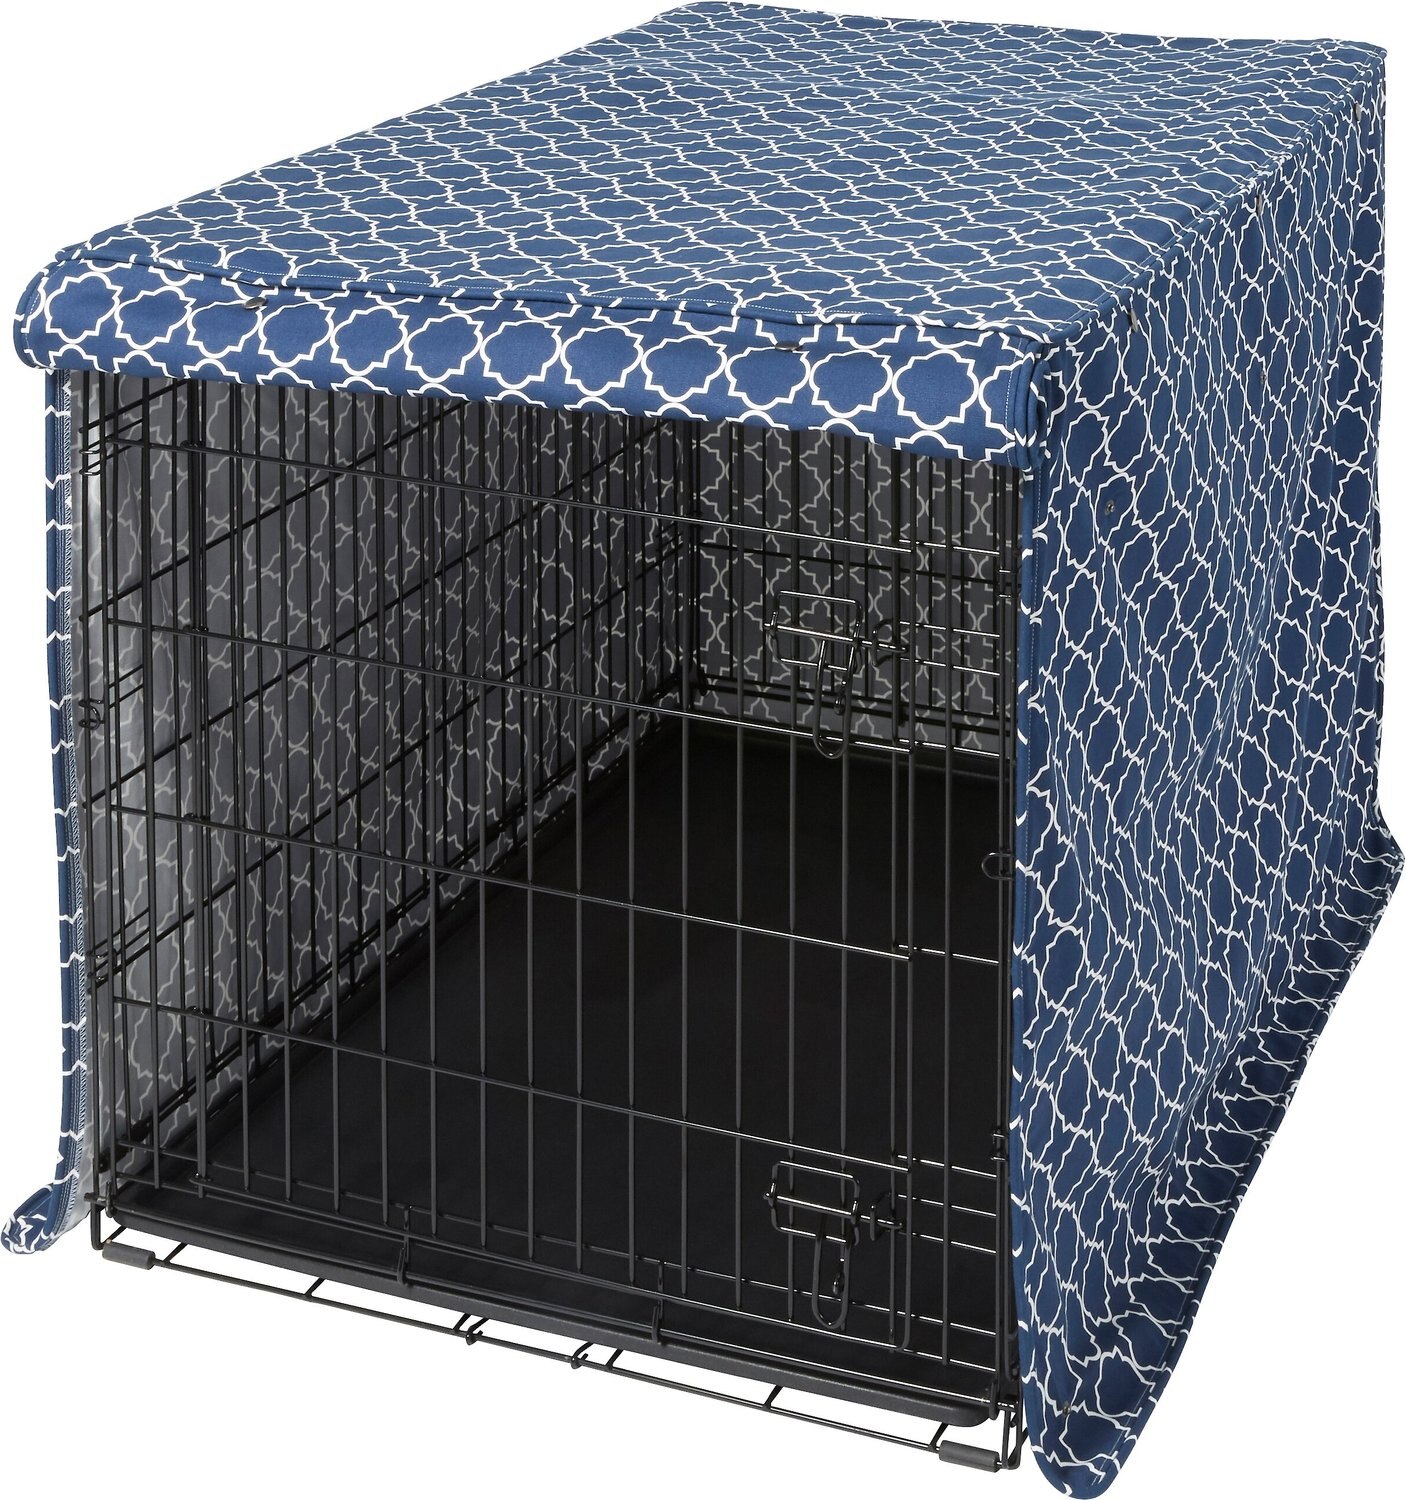 FRISCO Crate Cover, Navy Trellis, 42 inch